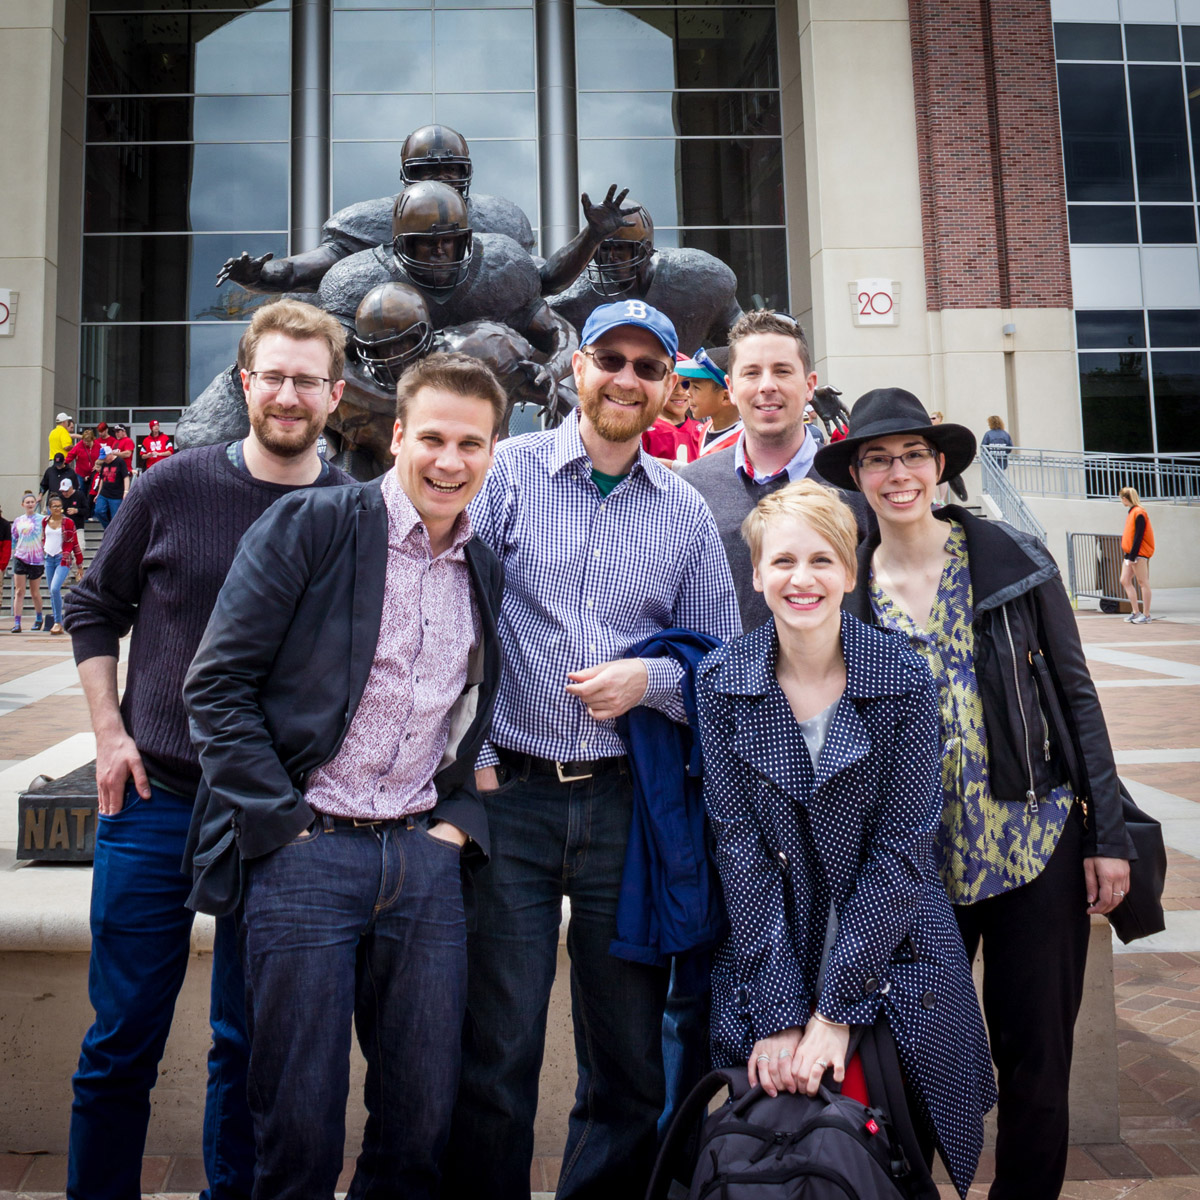 Justin D. Livingstone, James Mussell, Adrian S. Wisnicki, Jared McDonald, Angela Aliff, and Mary Borgo Ton in Lincoln, Nebraska, 2016. Copyright Angela Aliff. Creative Commons Attribution-NonCommercial 3.0 Unported (https://creativecommons.org/licenses/by-nc/3.0/).